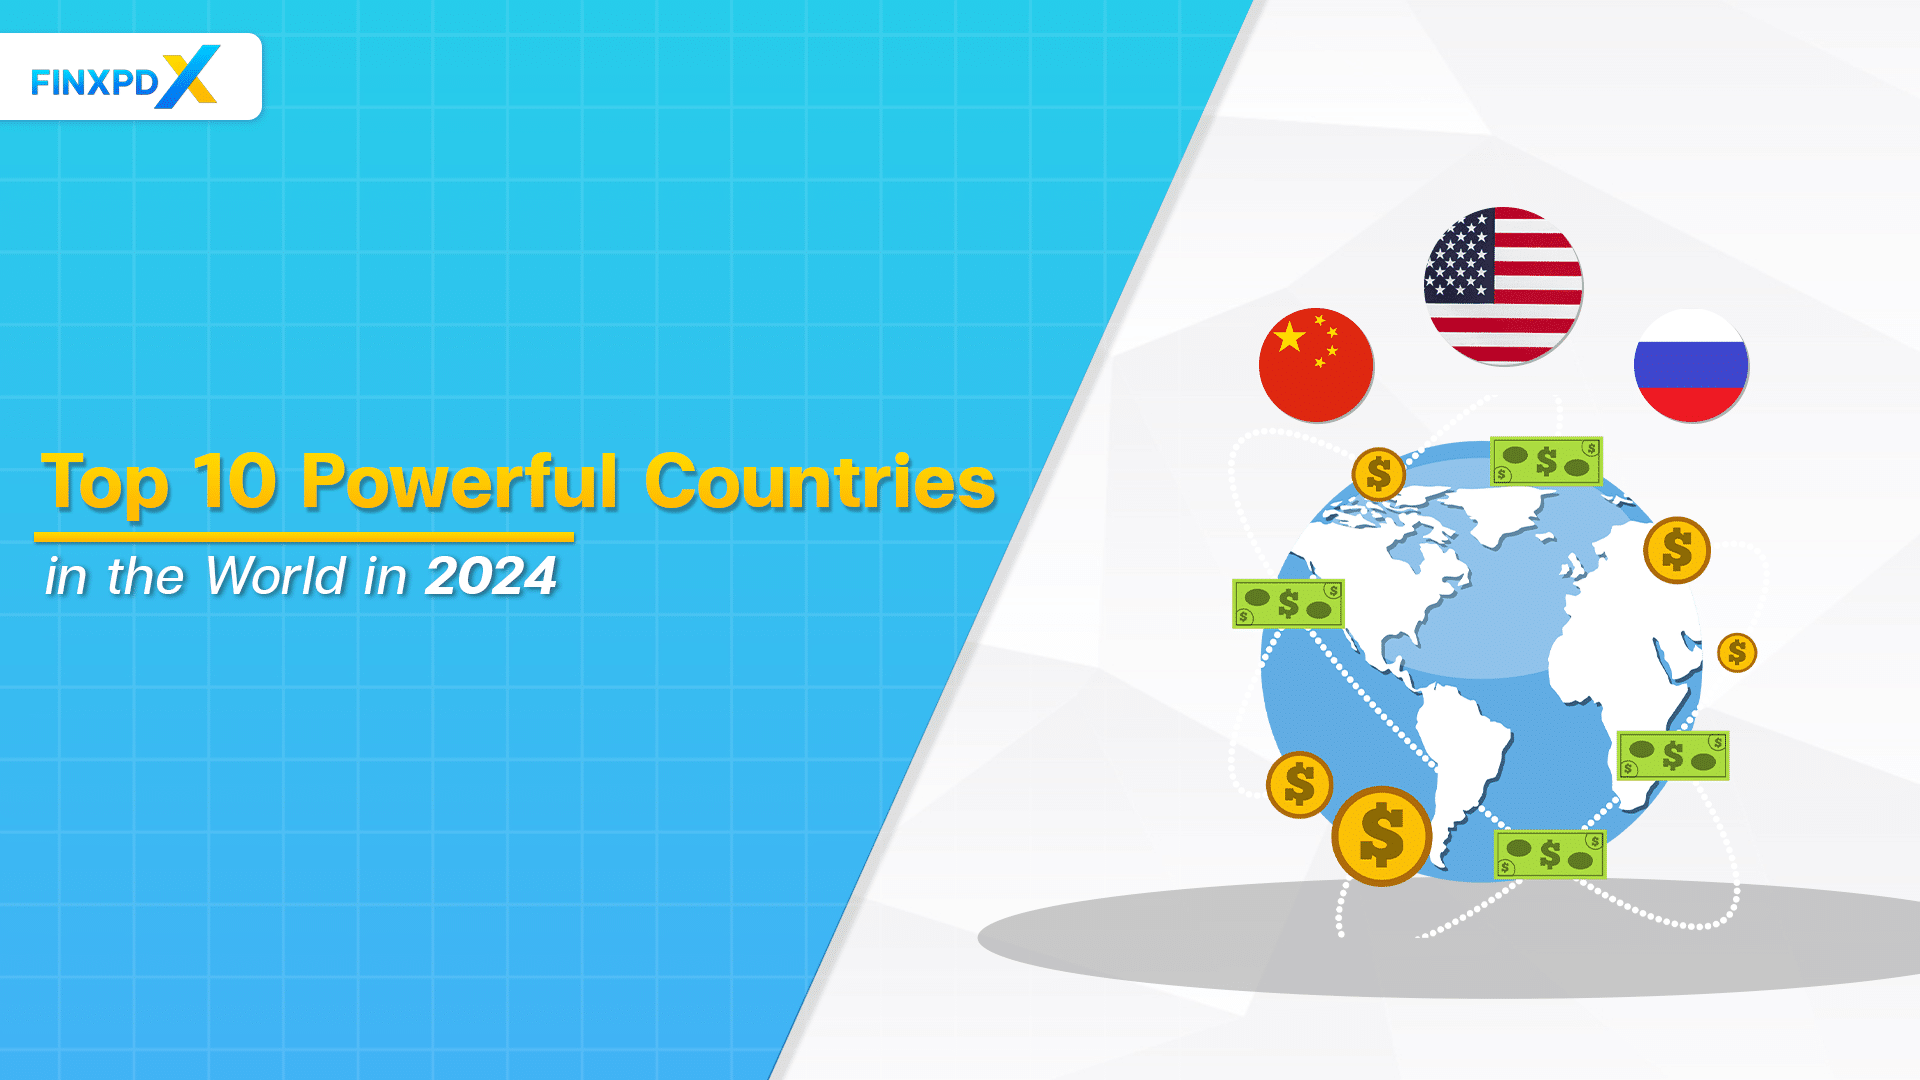 Top 10 Powerful Countries in the World 2024